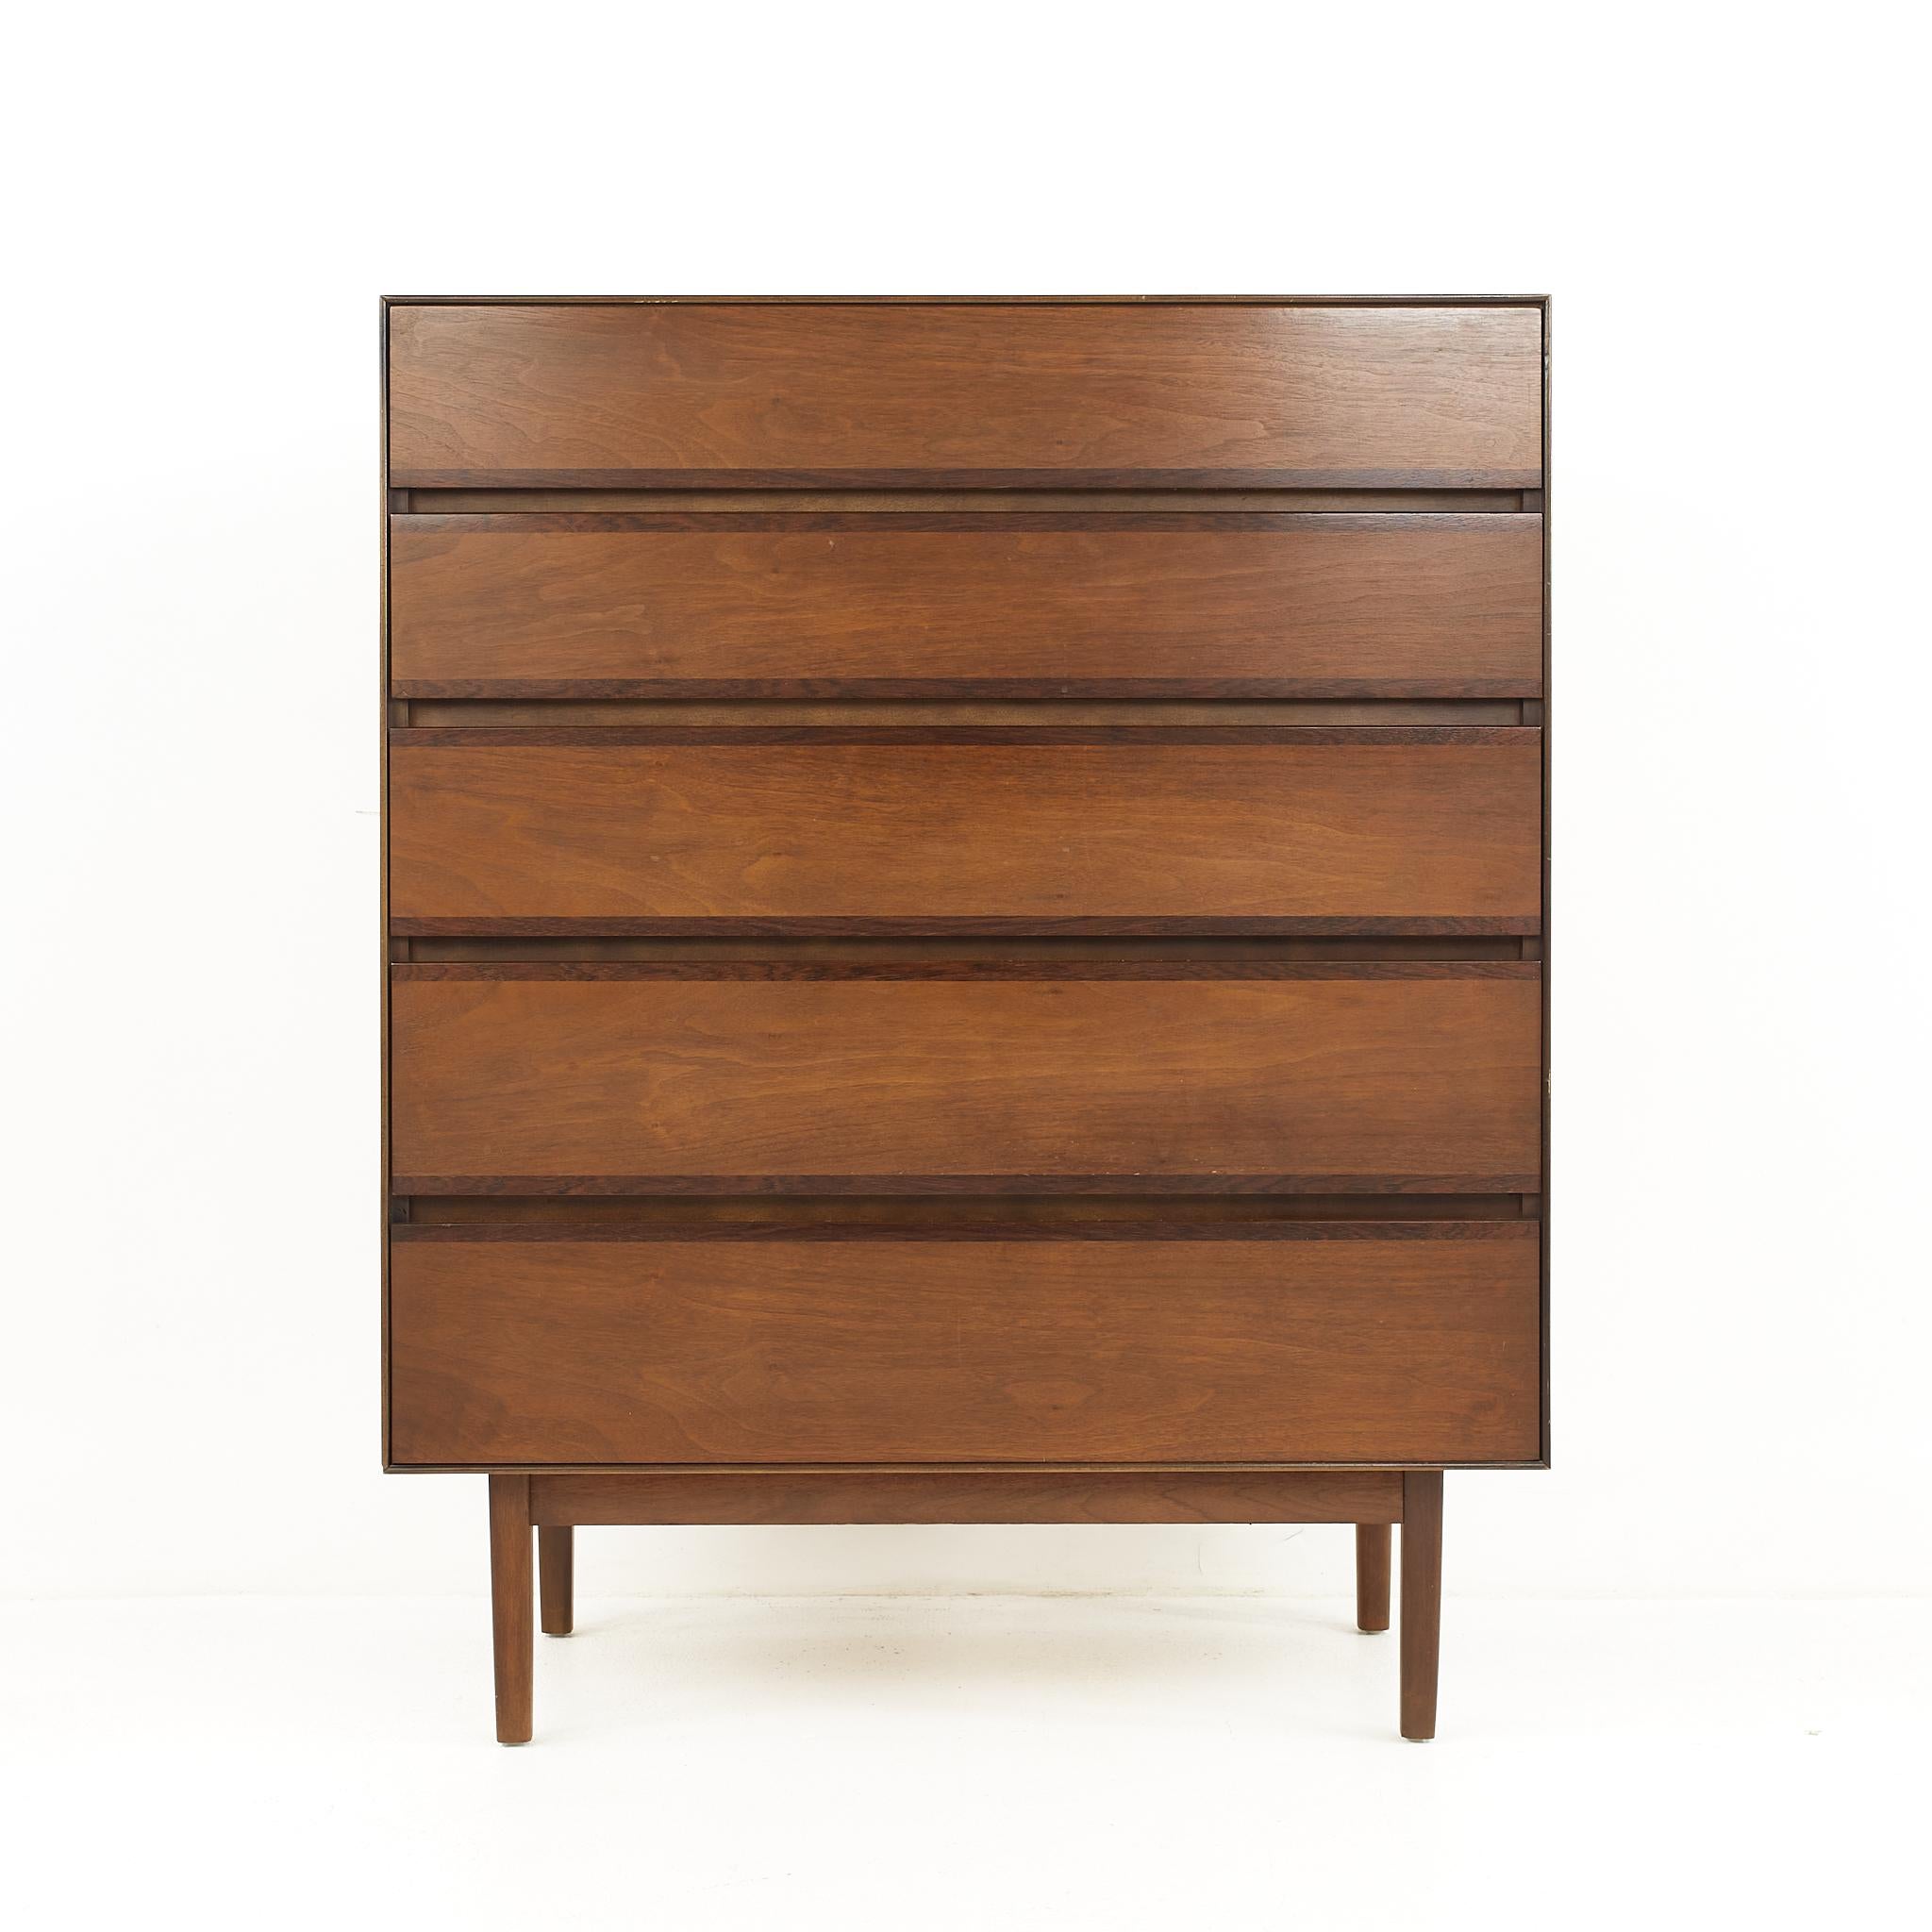 Stanley mid-century walnut 5 drawer highboy dresser.

The dresser measures: 36 wide x 18 deep x 45.25 inches high.

All pieces of furniture can be had in what we call restored vintage condition. That means the piece is restored upon purchase so